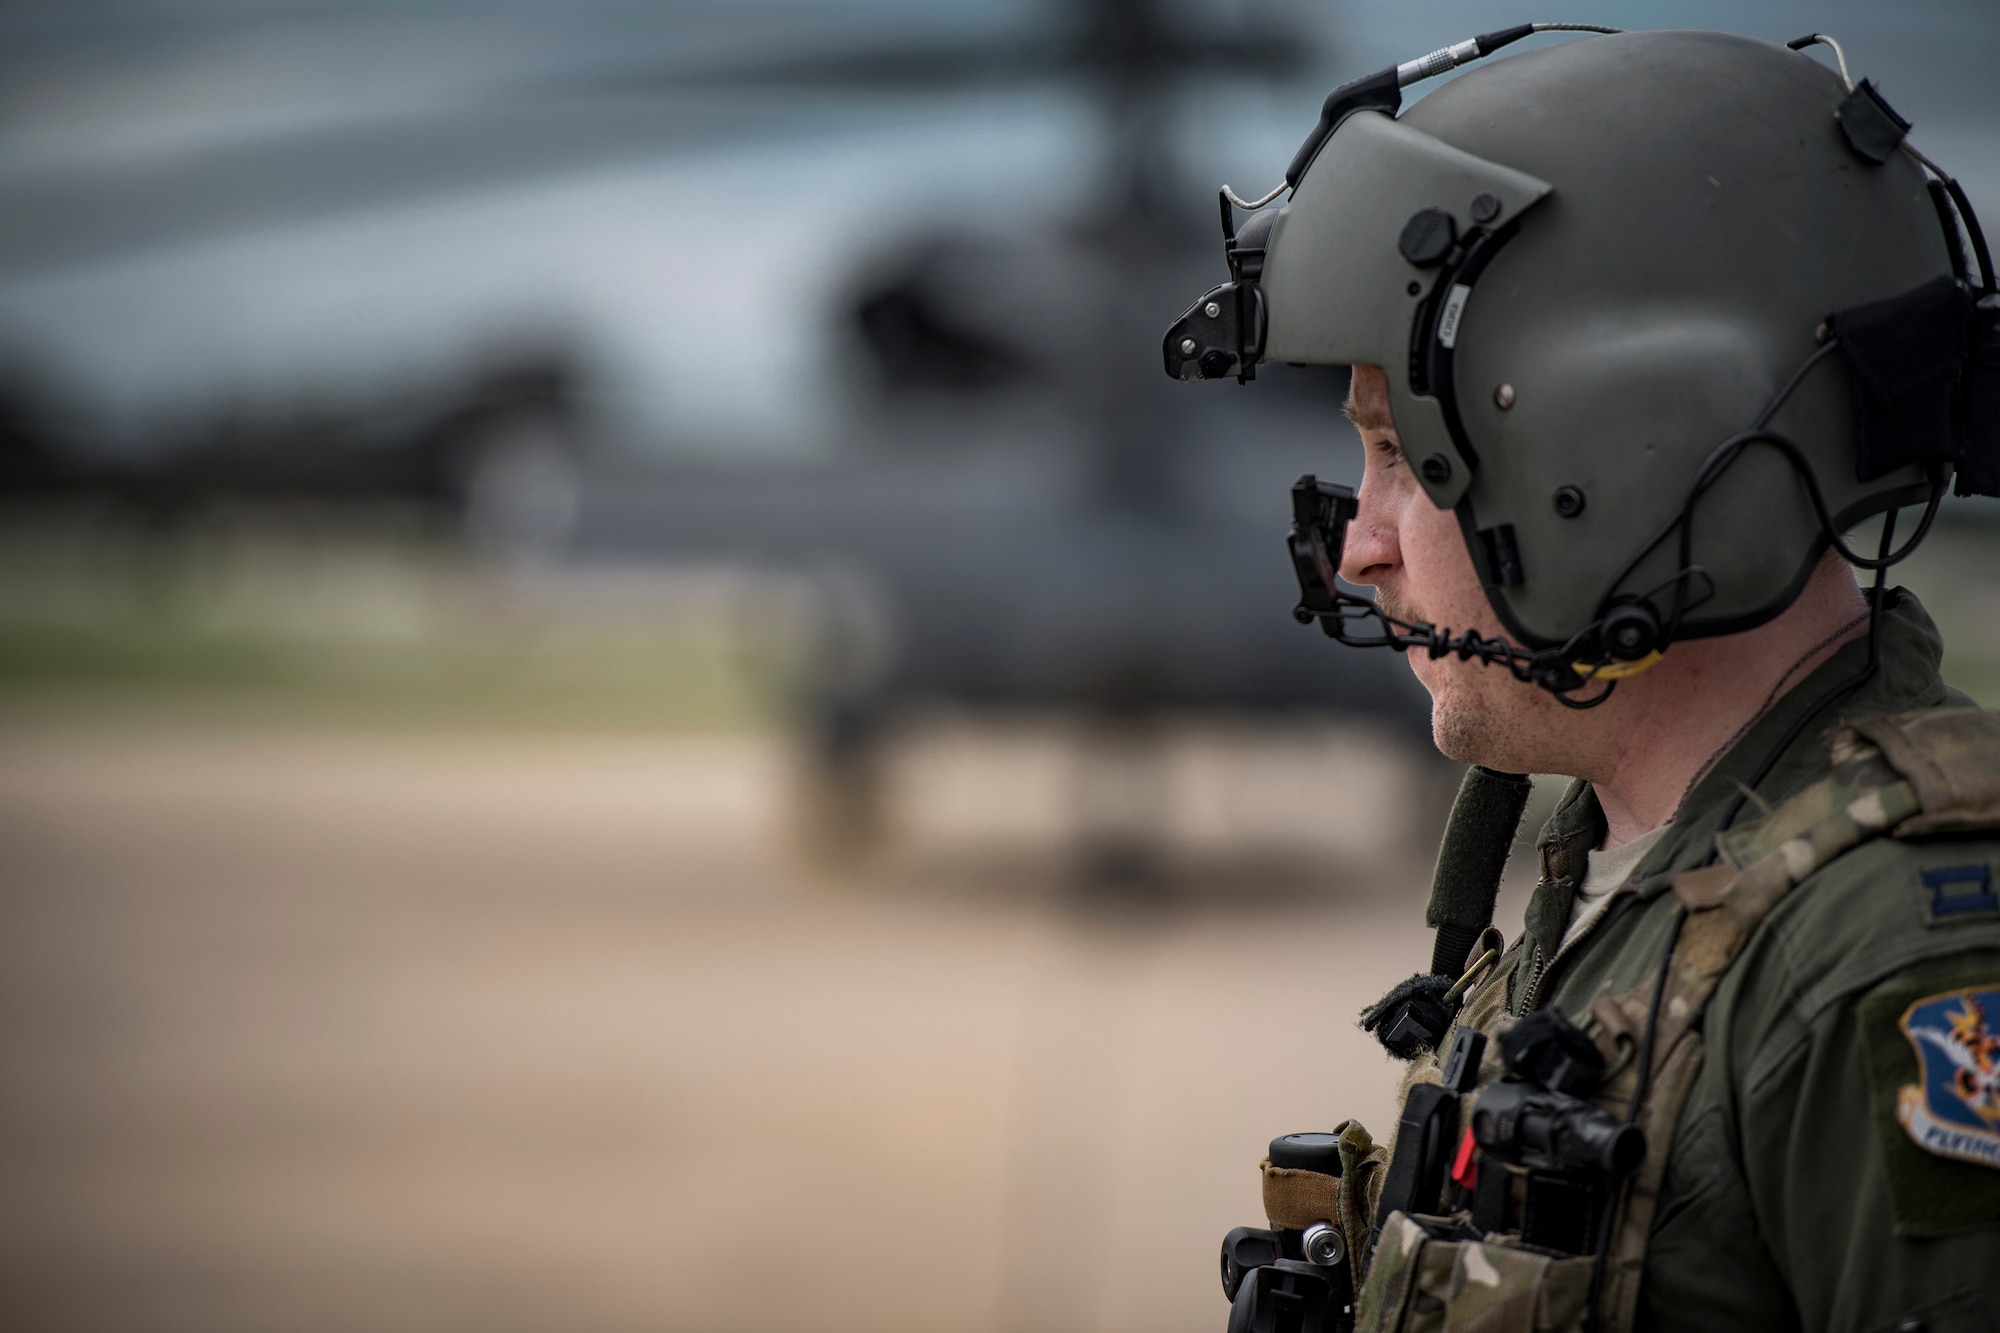 An HH-60G Pave Hawk pilot from the 41st Rescue Squadron walks across the flightline following a sortie in support of Hurricane Harvey relief efforts, Aug. 29, 2017, at Easterwood Airport, College Station, Texas.